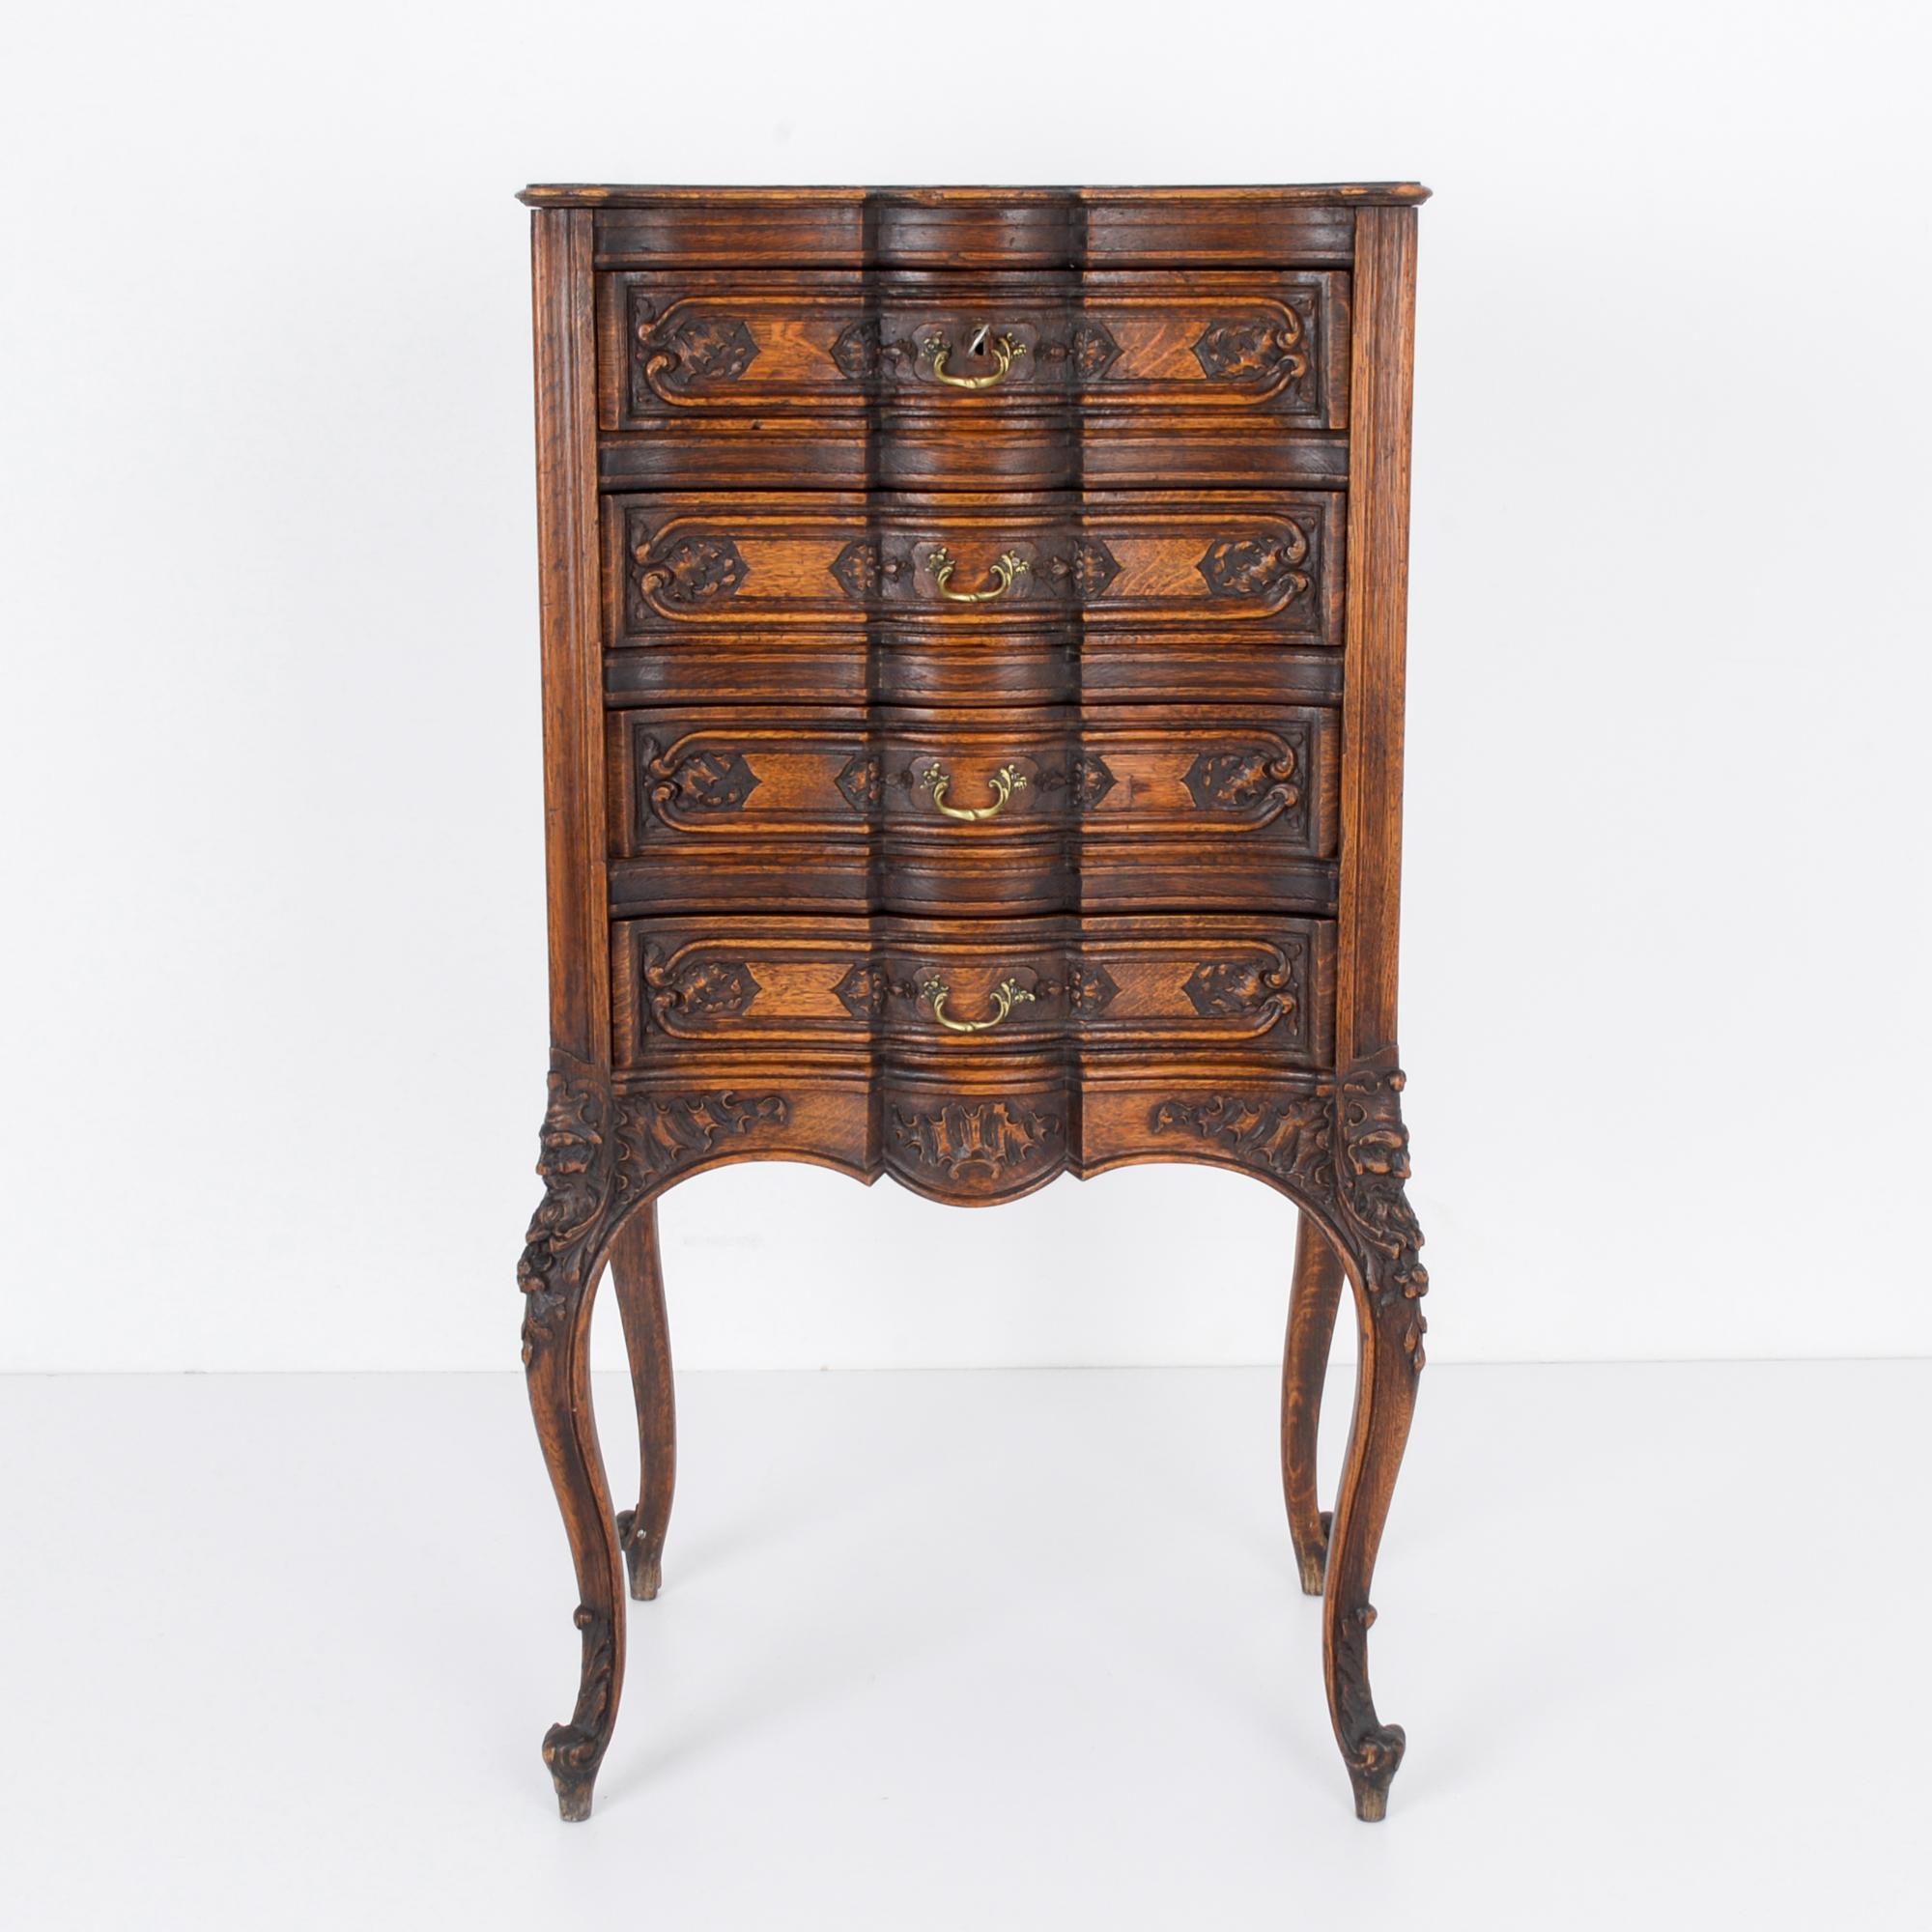 This ornate wooden chest of drawers with intricate carvings of leaves, flowers, and faces was made in France. Elevated on cabriole legs, the center of the drawers are carved to have a recessed appearance. The elegant paneling and contoured apron